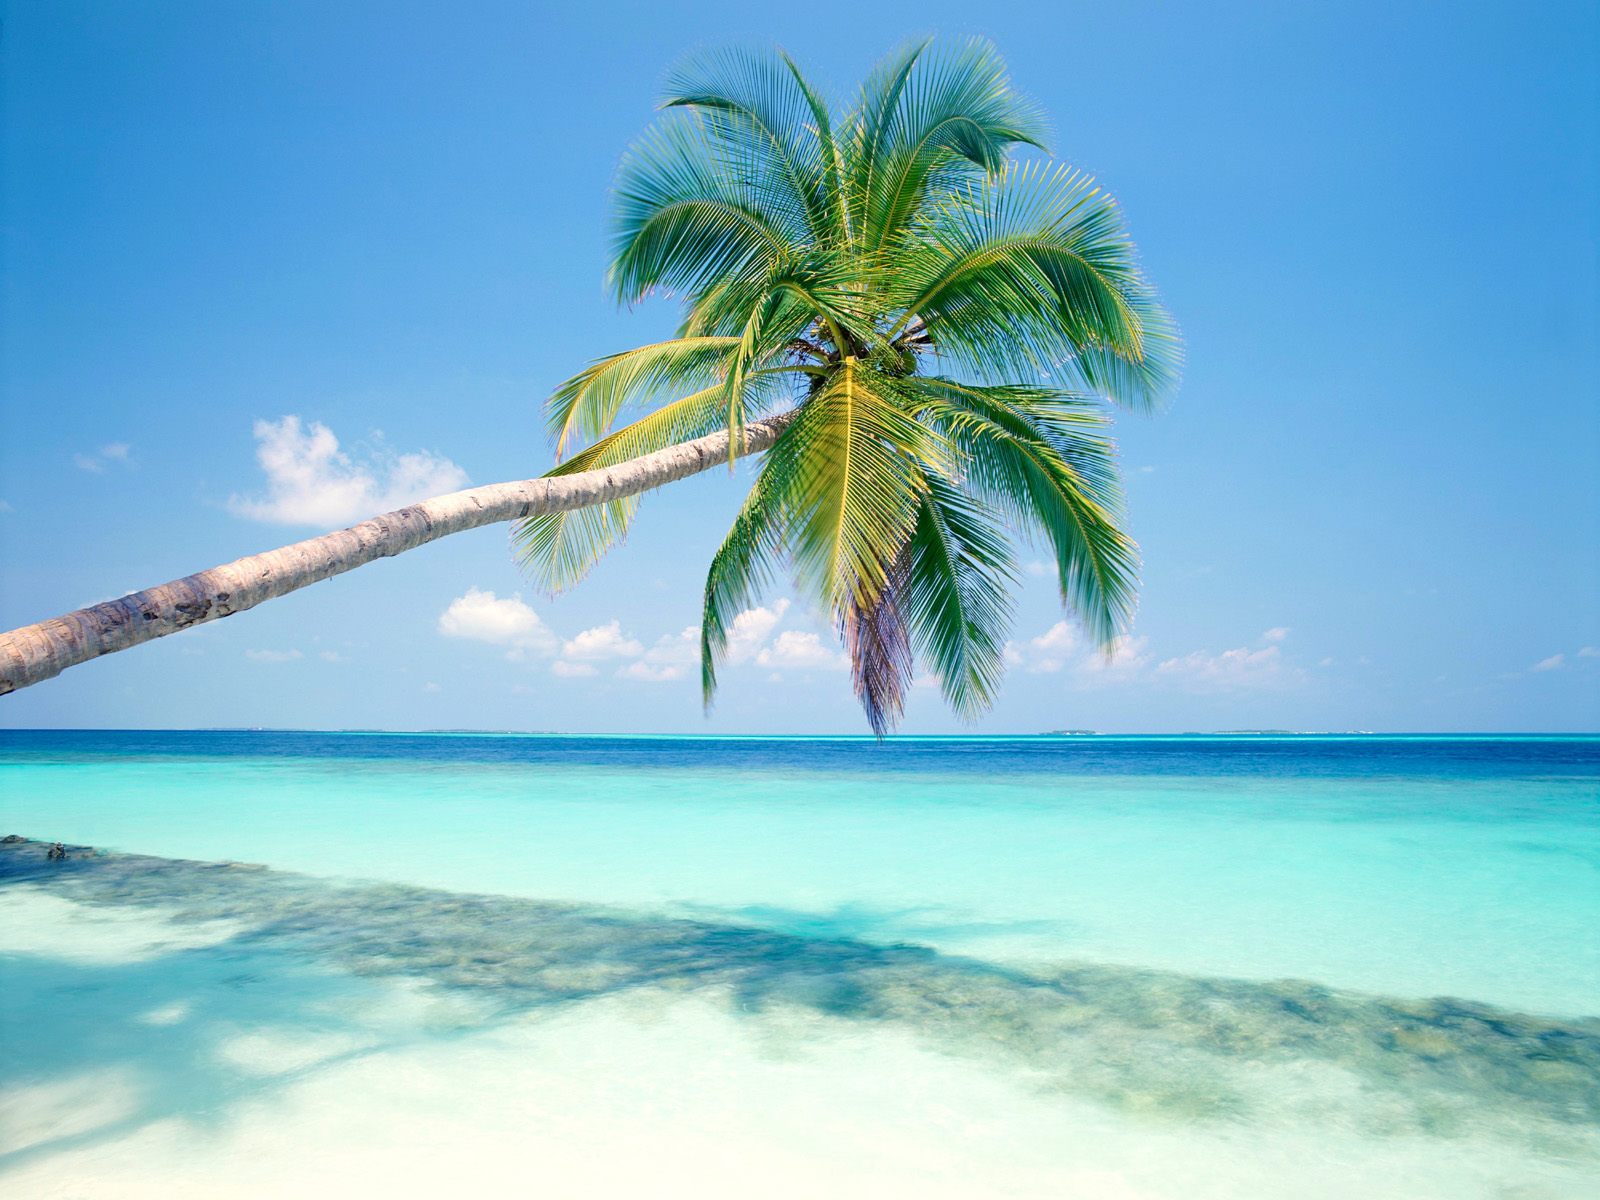 Tropical island pictures wallpaper